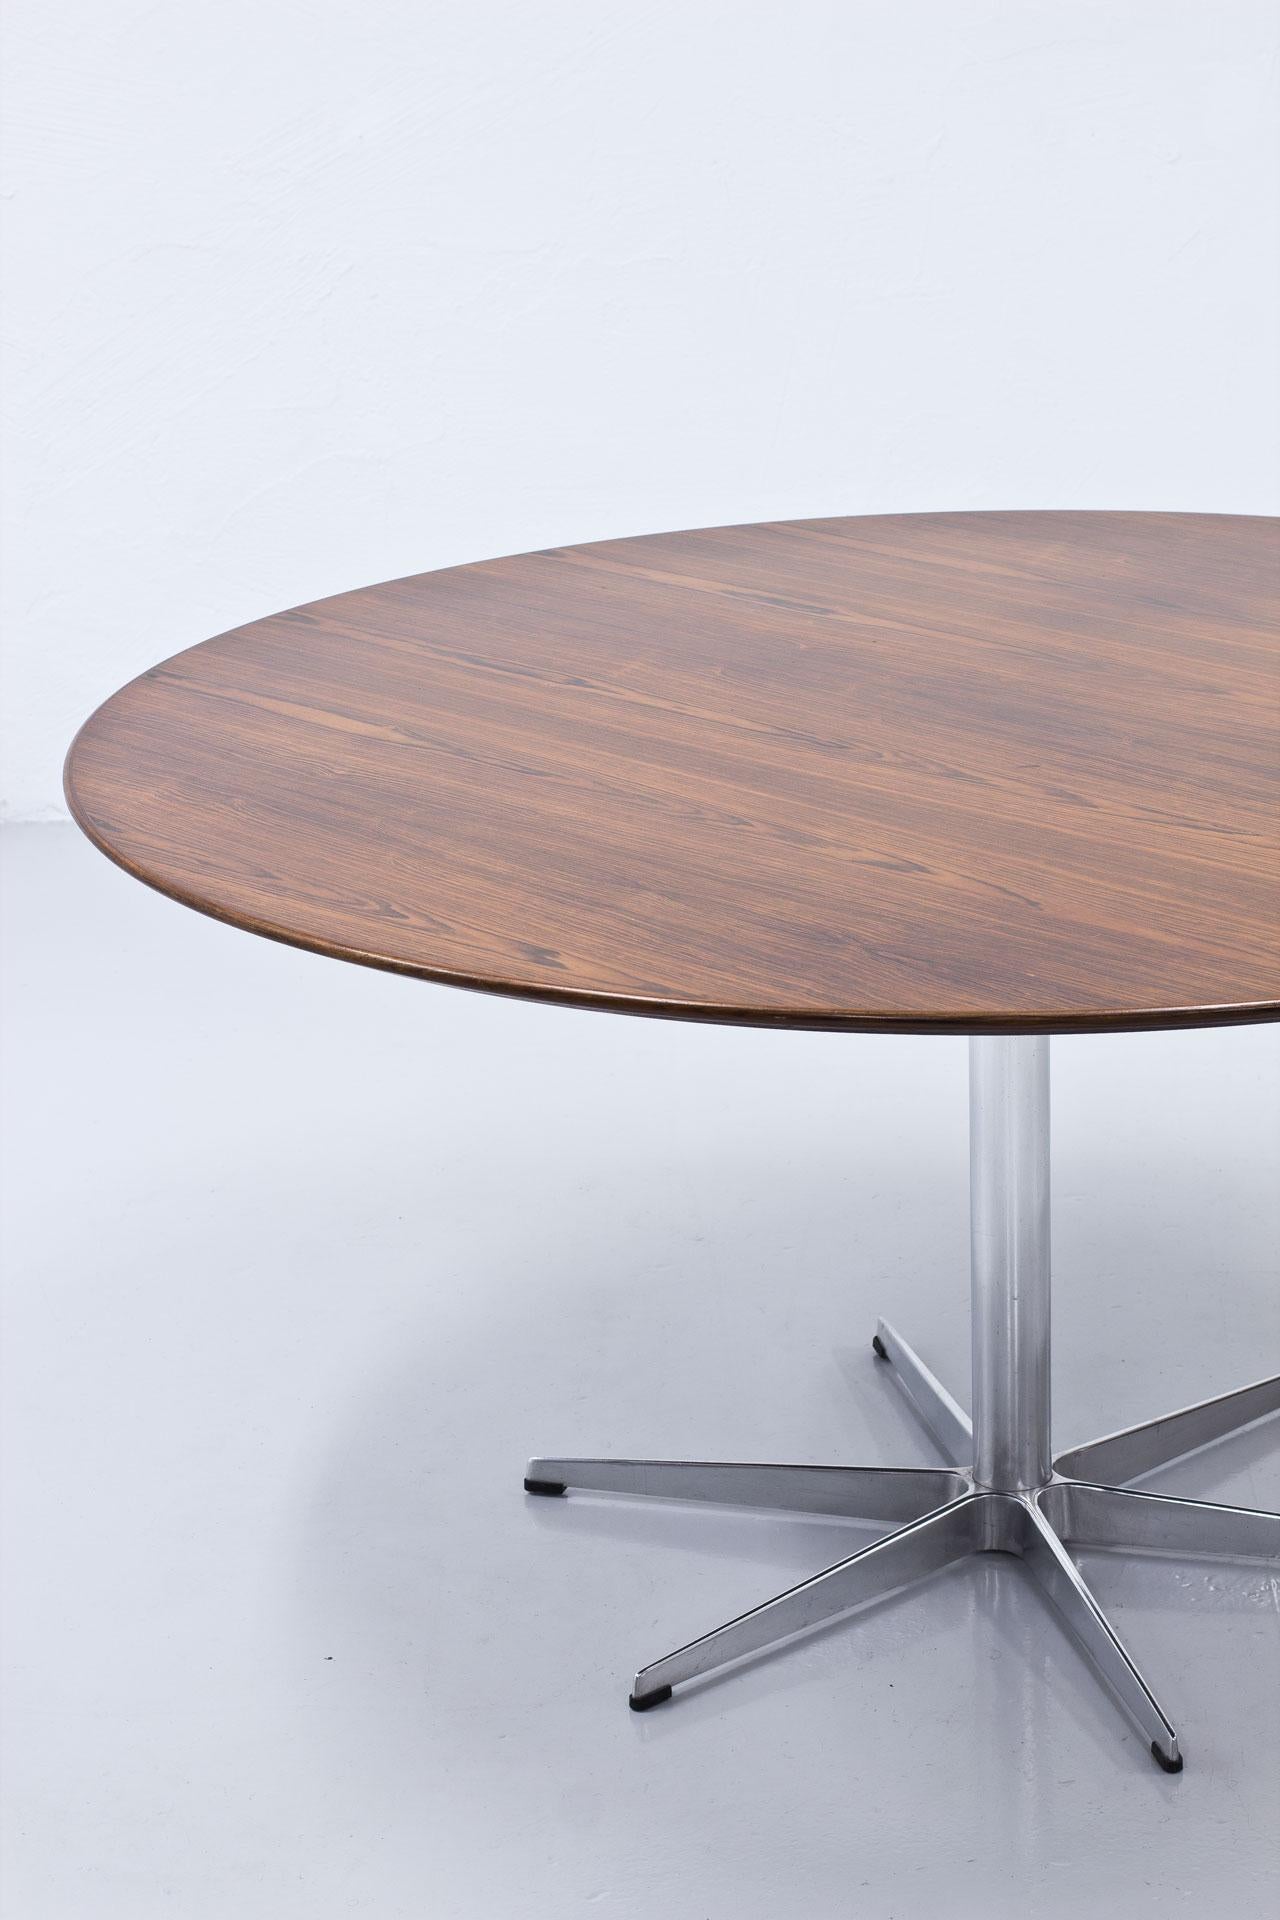 20th Century Arne Jacobsen Rosewood Dining Table